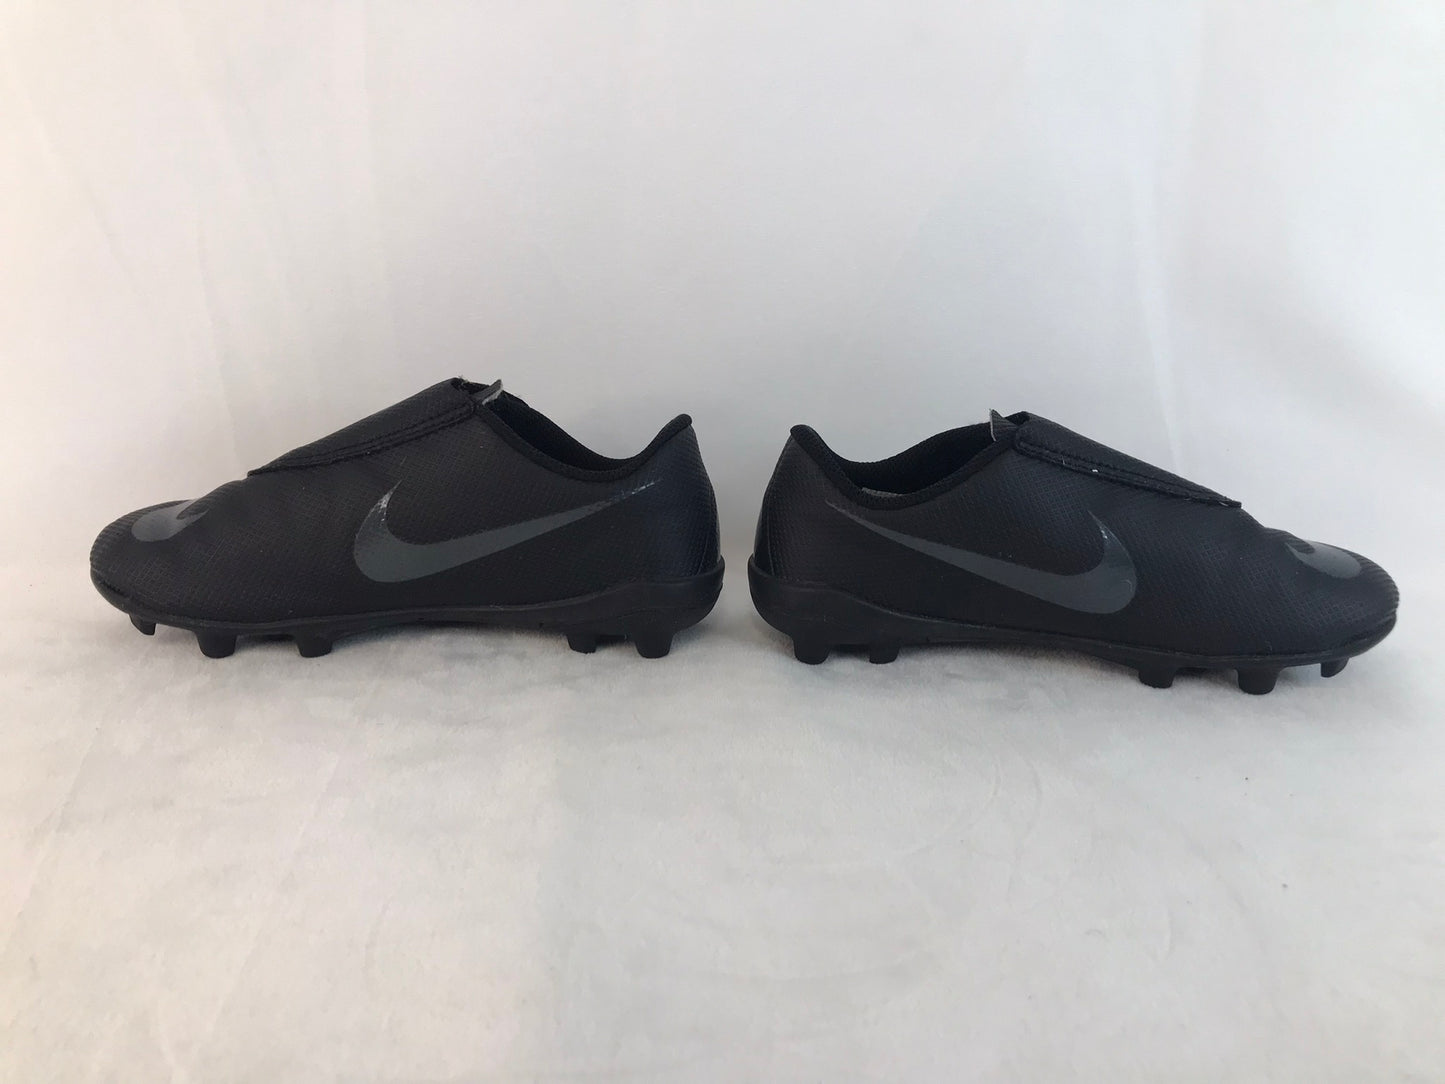 Soccer Shoes Cleats Child Size 13 Nike Murcurial Black Excellent